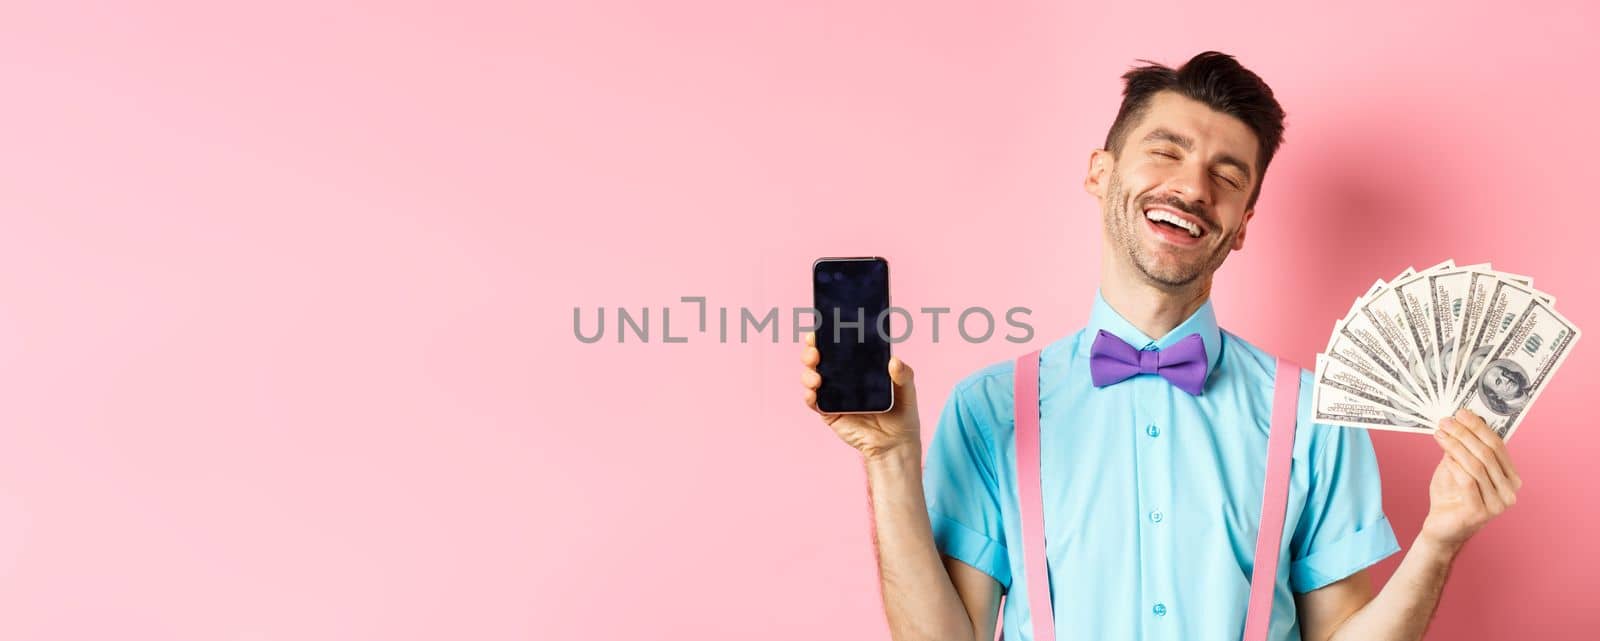 E-commerce and shopping concept. Rich and happy guy laughing, showing money in cash and empty smartphone screen, standing on pink background.